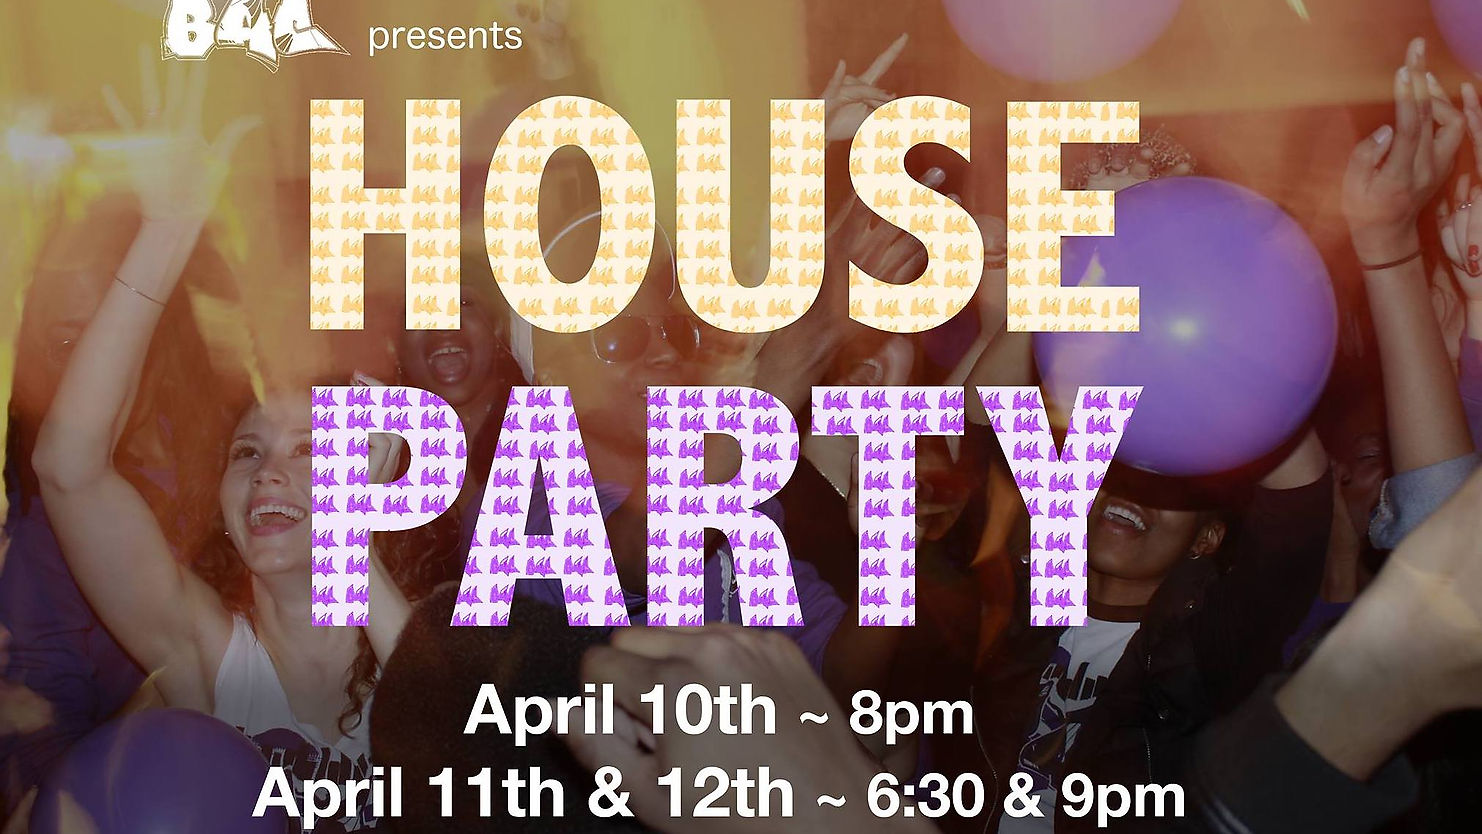 BAC Presents: House Party (Spring 2014)